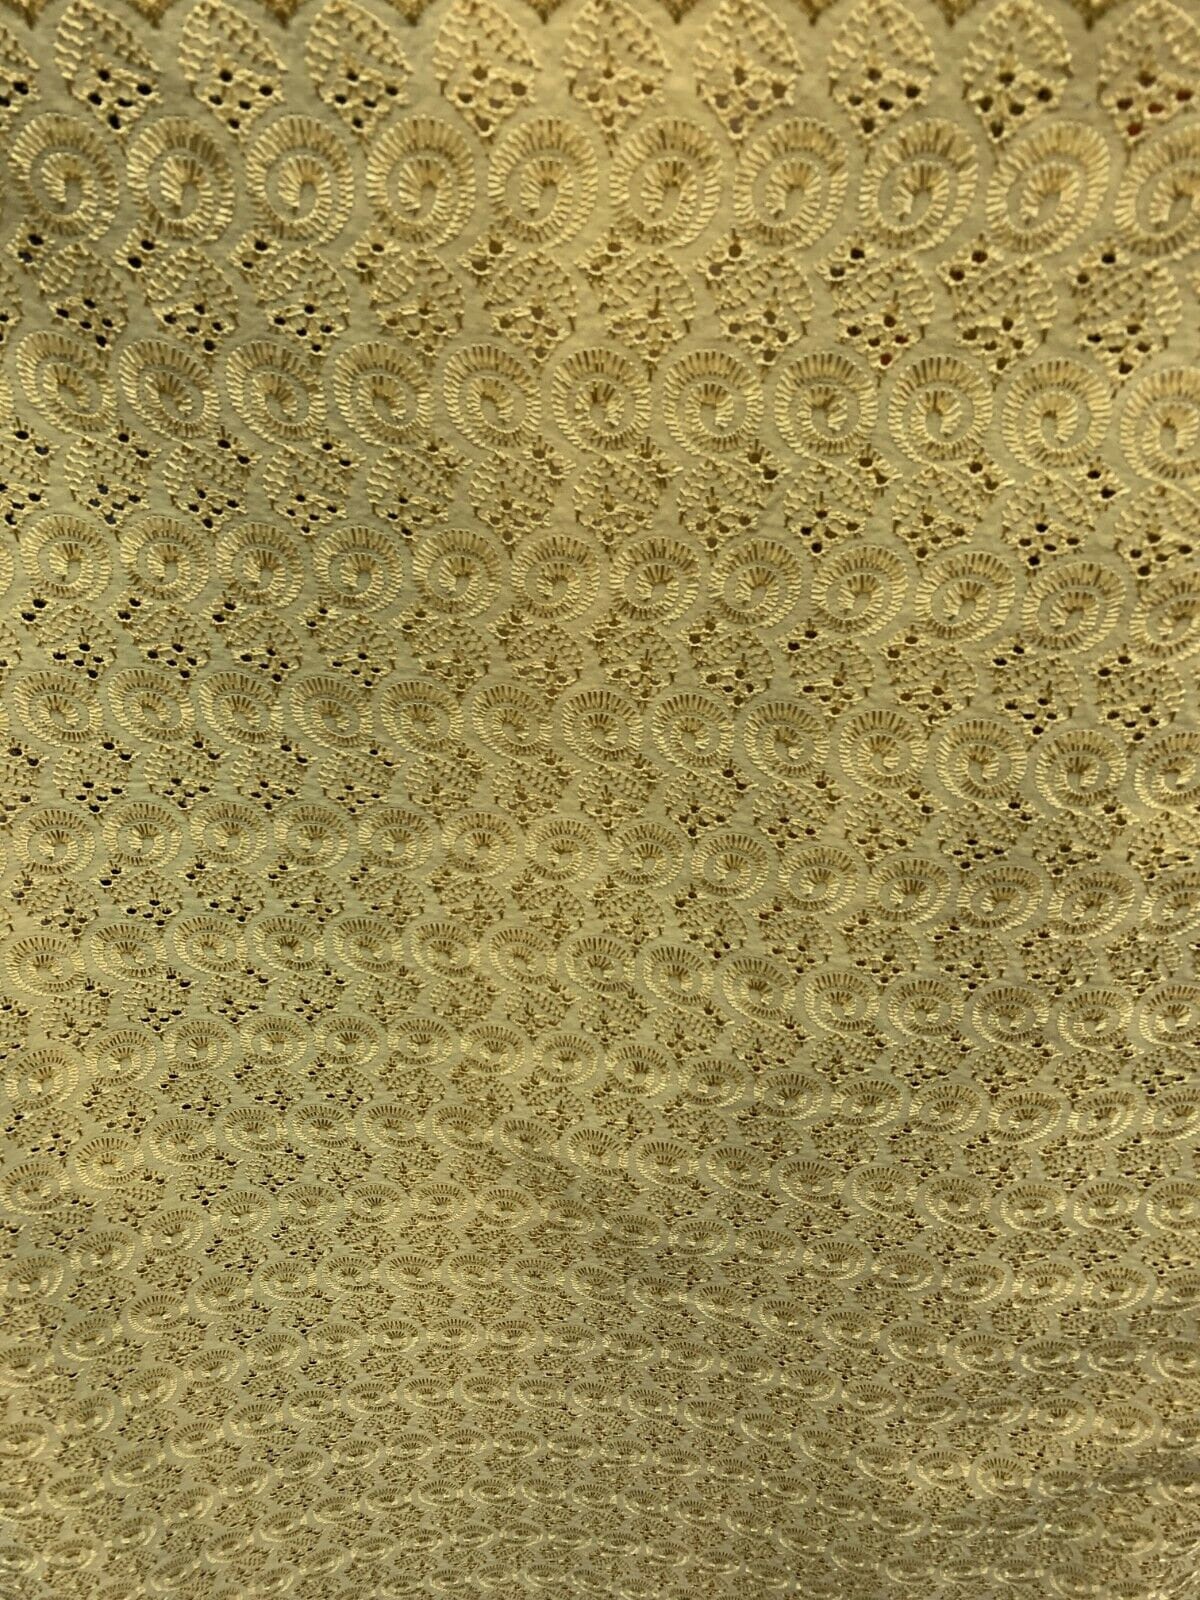 LIGHT GOLD Floral Cotton Eyelet Embroidered Fabric (45 in.) Sold By The Yard